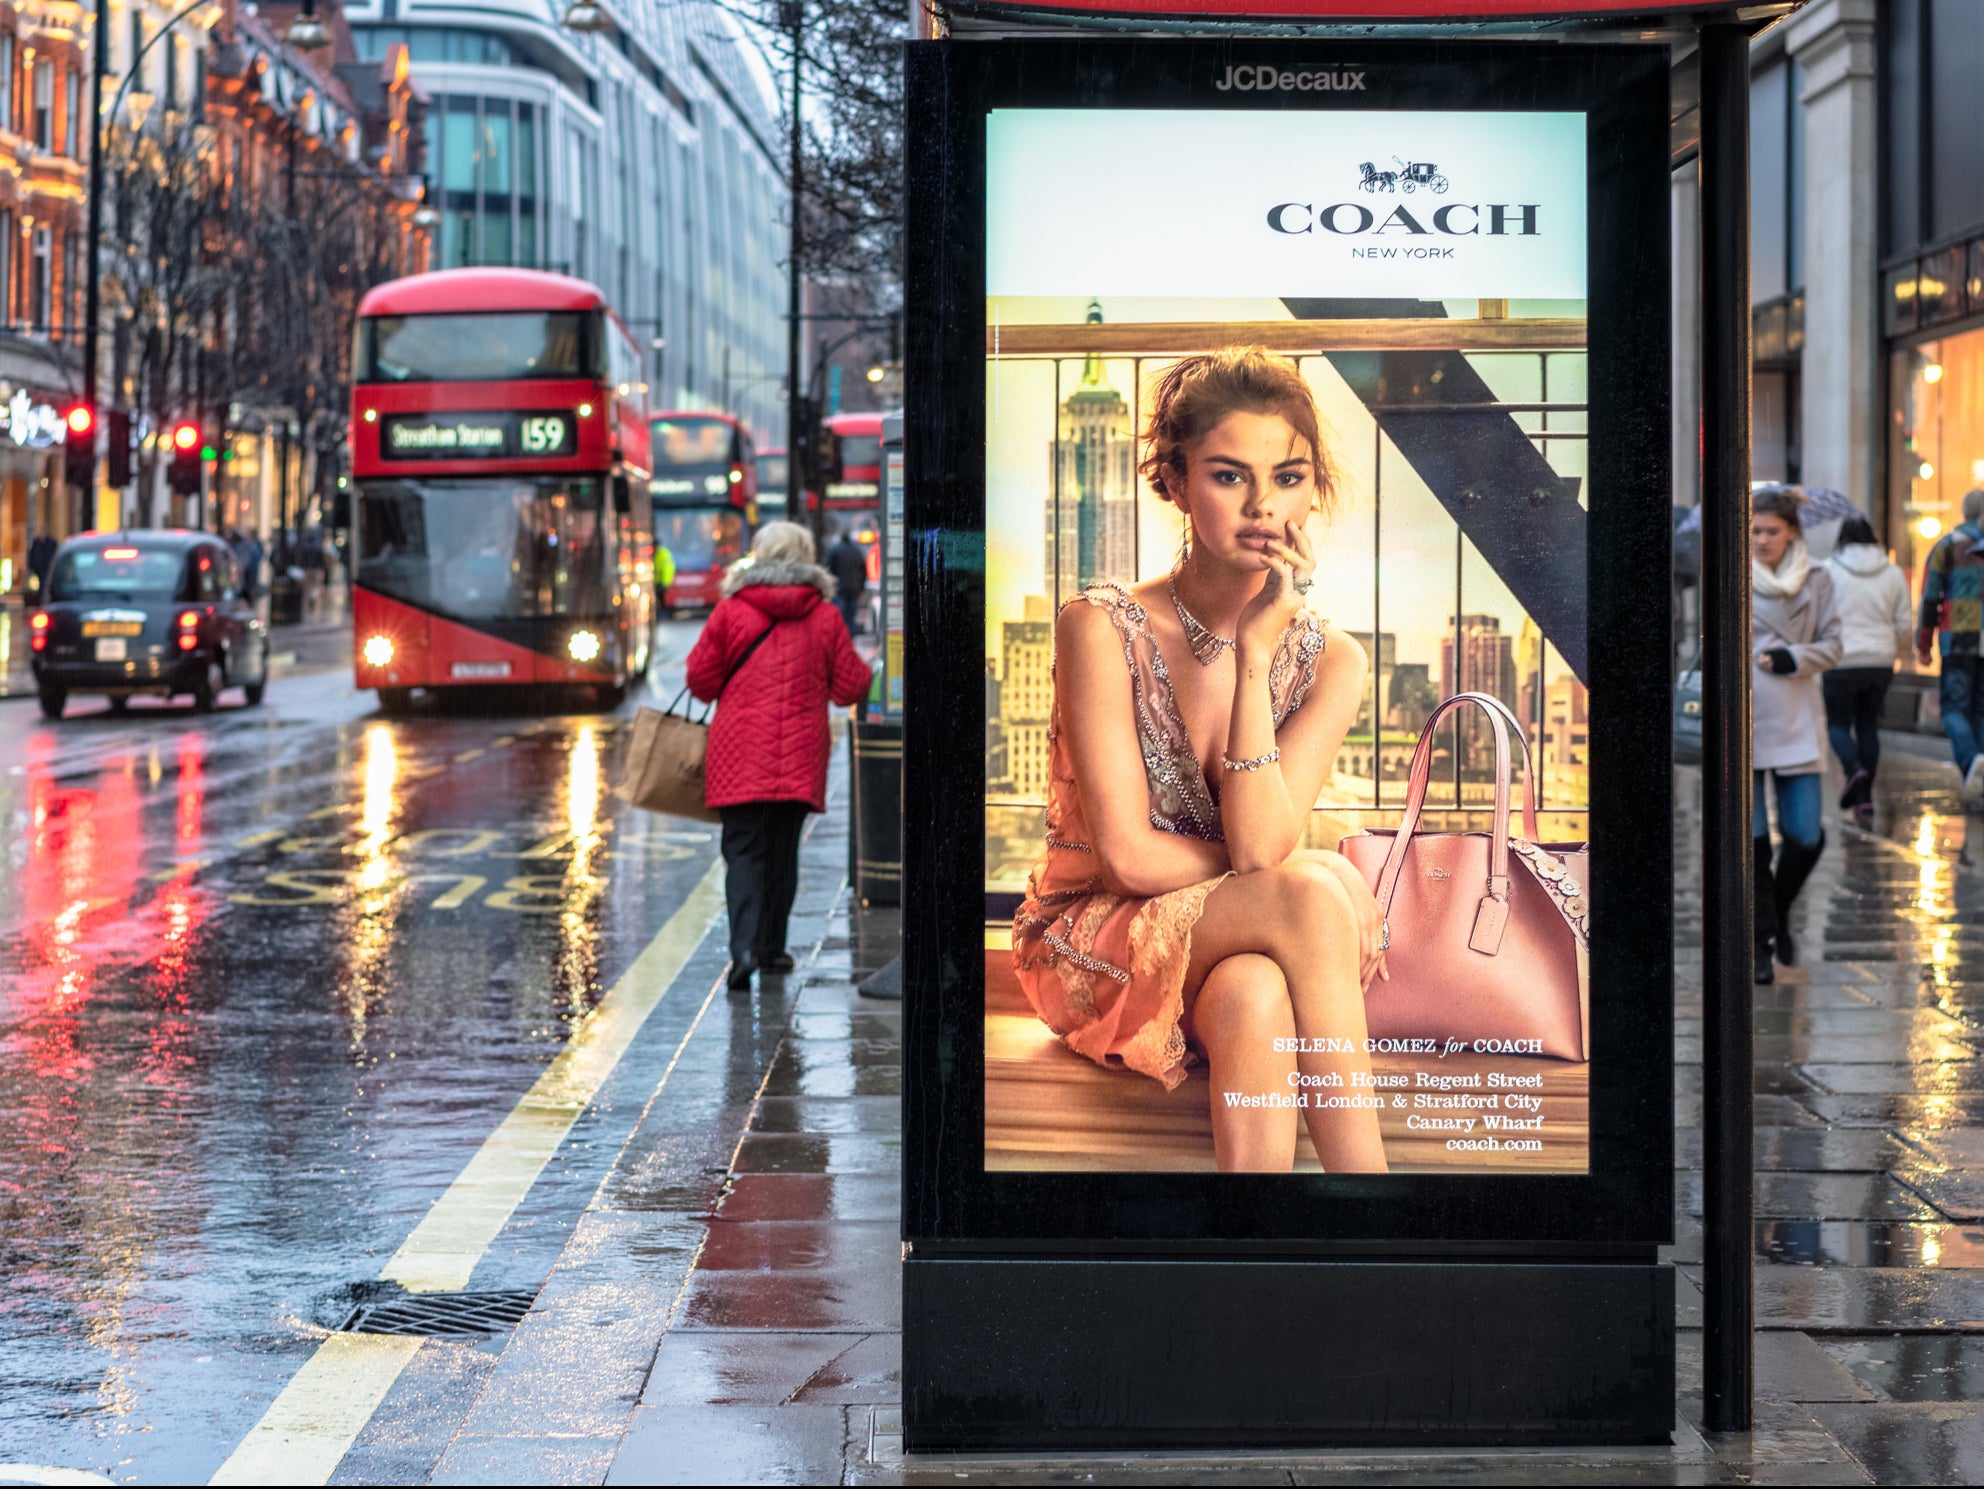 Selena Gomez features in an advertisement for Coach on an Oxford Street bus stop